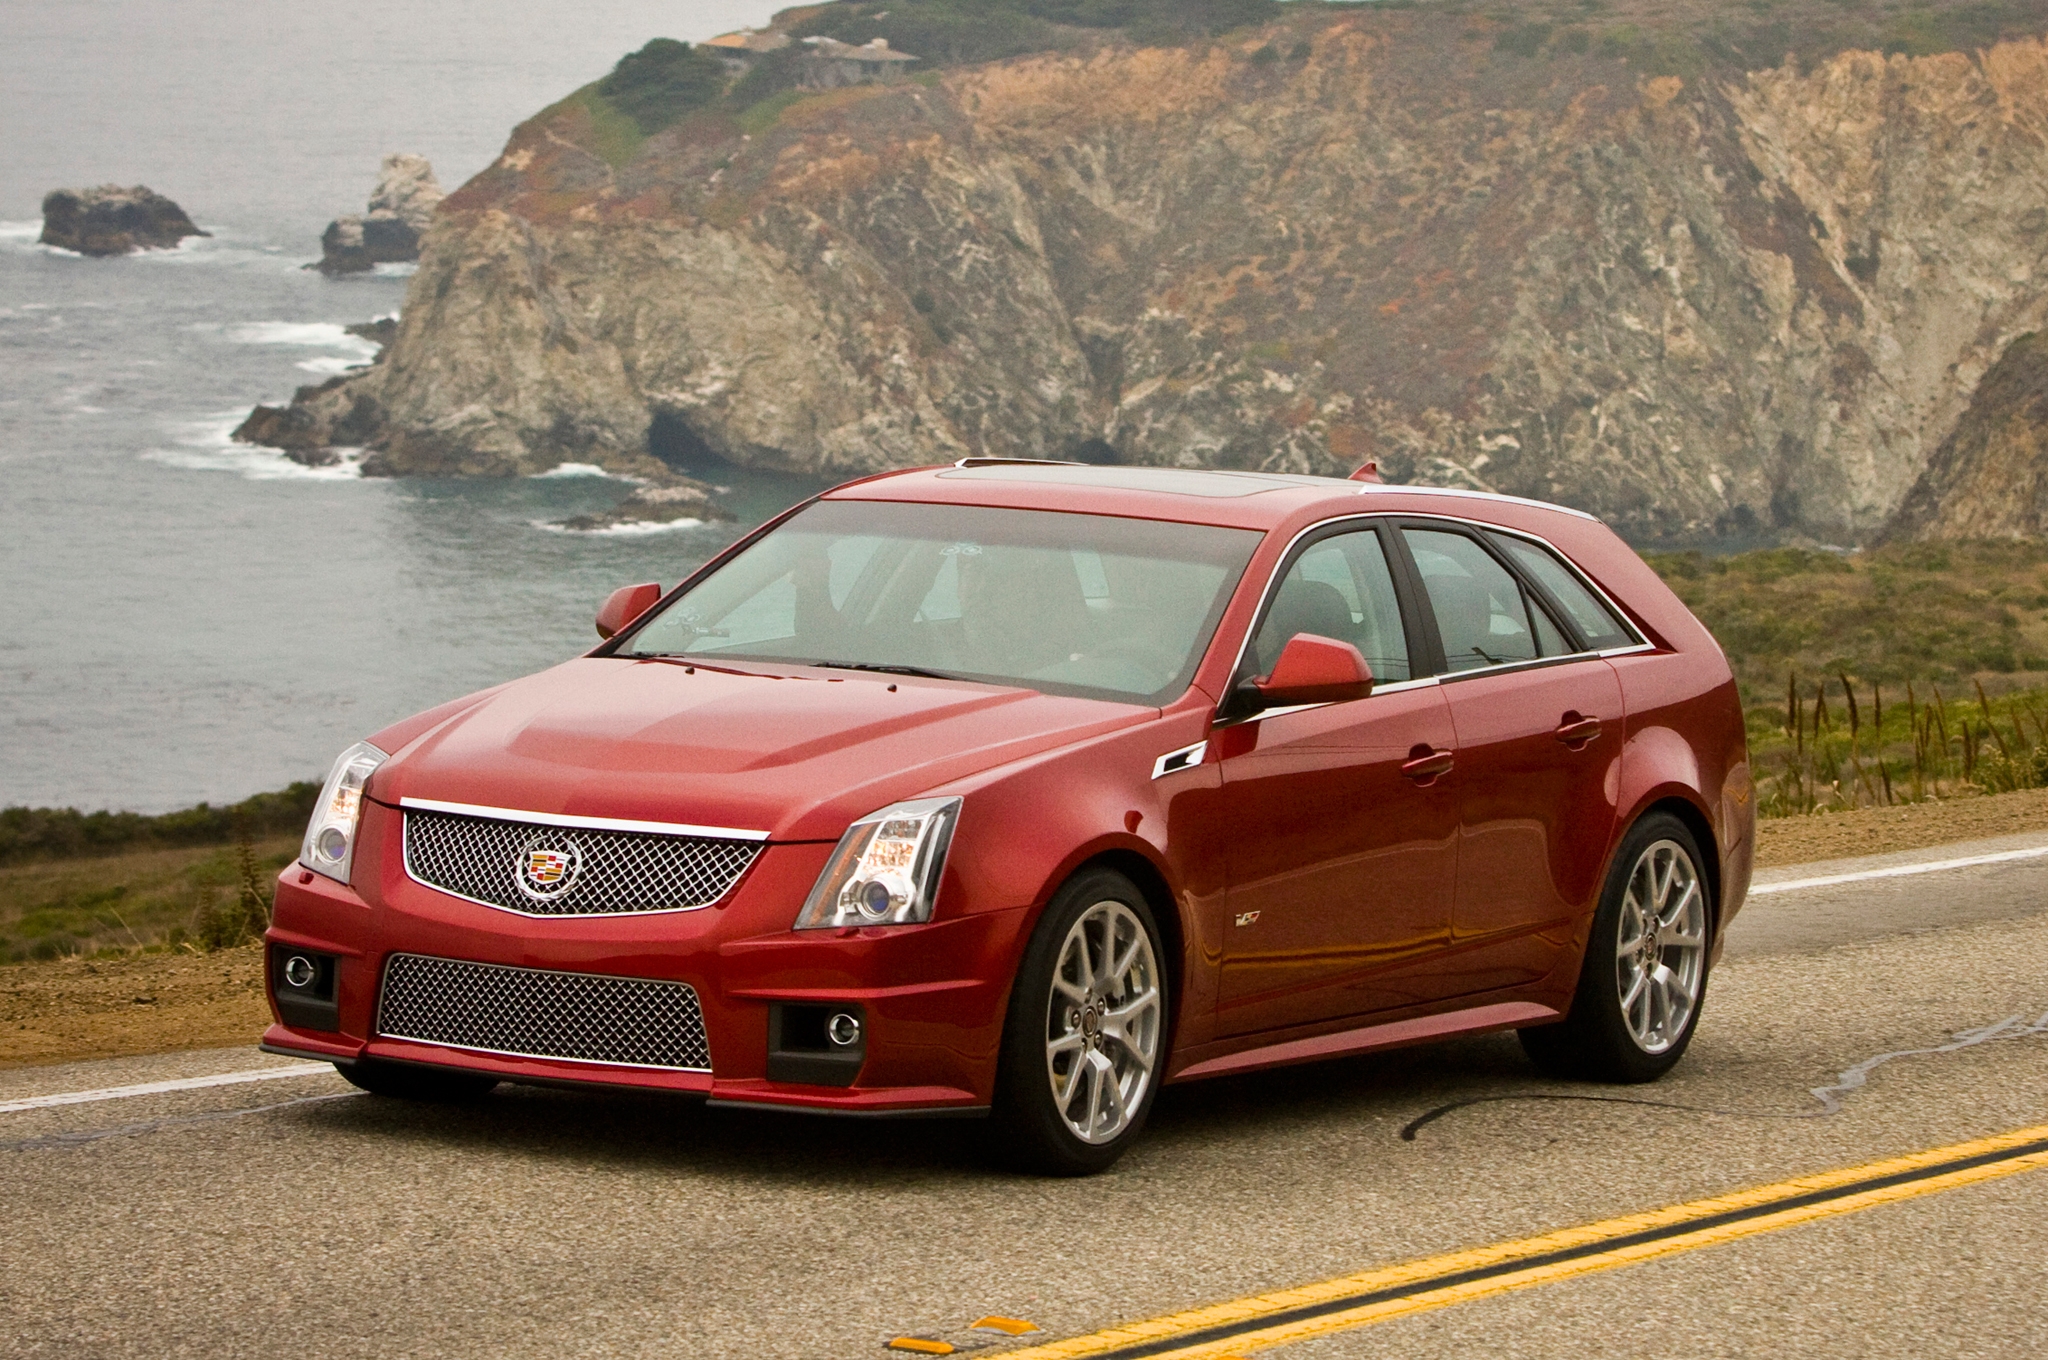 Cadillac Cts Background Wallpaper